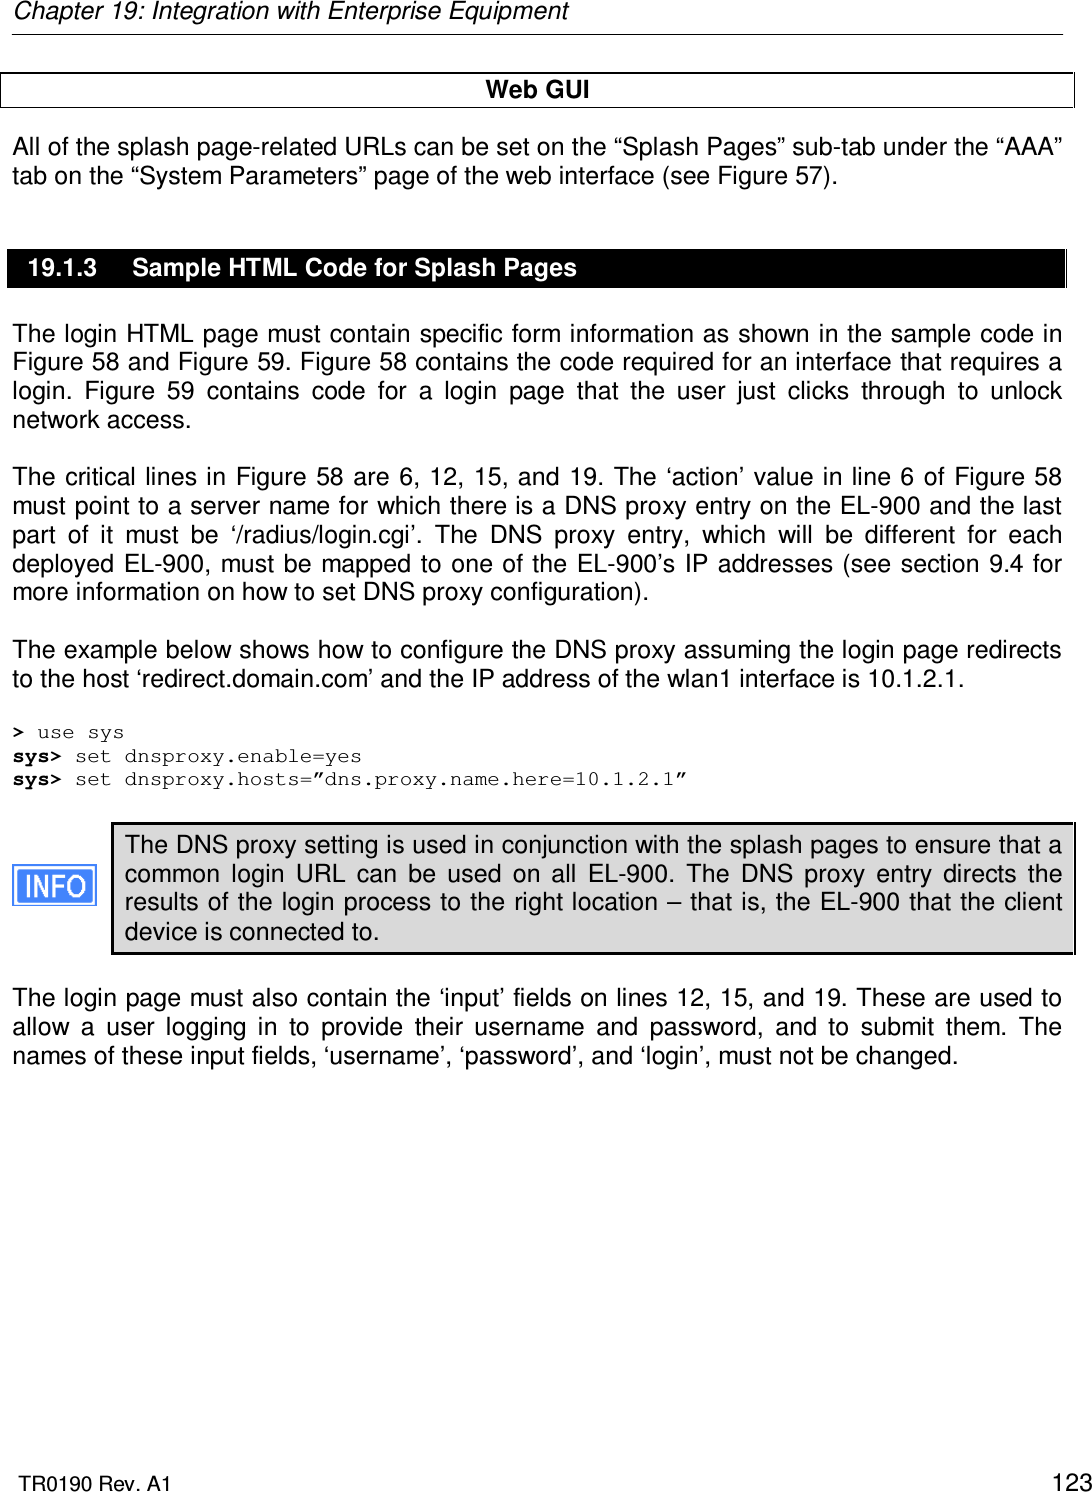 Chapter 19: Integration with Enterprise Equipment  TR0190 Rev. A1    123 Web GUI All of the splash page-related URLs can be set on the “Splash Pages” sub-tab under the “AAA” tab on the “System Parameters” page of the web interface (see Figure 57). 19.1.3  Sample HTML Code for Splash Pages The login HTML page must contain specific form information as shown in the sample code in Figure 58 and Figure 59. Figure 58 contains the code required for an interface that requires a login.  Figure  59  contains  code  for  a  login  page  that  the  user  just  clicks  through  to  unlock network access.   The critical lines in Figure 58 are 6, 12, 15, and 19. The ‘action’ value in line 6 of Figure 58 must point to a server name for which there is a DNS proxy entry on the EL-900 and the last part  of  it  must  be  ‘/radius/login.cgi’.  The  DNS  proxy  entry,  which  will  be  different  for  each deployed EL-900, must be mapped to one of the EL-900’s IP addresses (see section 9.4 for more information on how to set DNS proxy configuration).   The example below shows how to configure the DNS proxy assuming the login page redirects to the host ‘redirect.domain.com’ and the IP address of the wlan1 interface is 10.1.2.1.  &gt; use sys sys&gt; set dnsproxy.enable=yes sys&gt; set dnsproxy.hosts=”dns.proxy.name.here=10.1.2.1”  The DNS proxy setting is used in conjunction with the splash pages to ensure that a common  login  URL  can  be  used  on  all  EL-900.  The  DNS  proxy  entry  directs  the results of the login process to the right location – that is, the EL-900 that the client device is connected to.  The login page must also contain the ‘input’ fields on lines 12, 15, and 19. These are used to allow  a  user  logging  in  to  provide  their  username  and  password,  and  to  submit  them.  The names of these input fields, ‘username’, ‘password’, and ‘login’, must not be changed.   